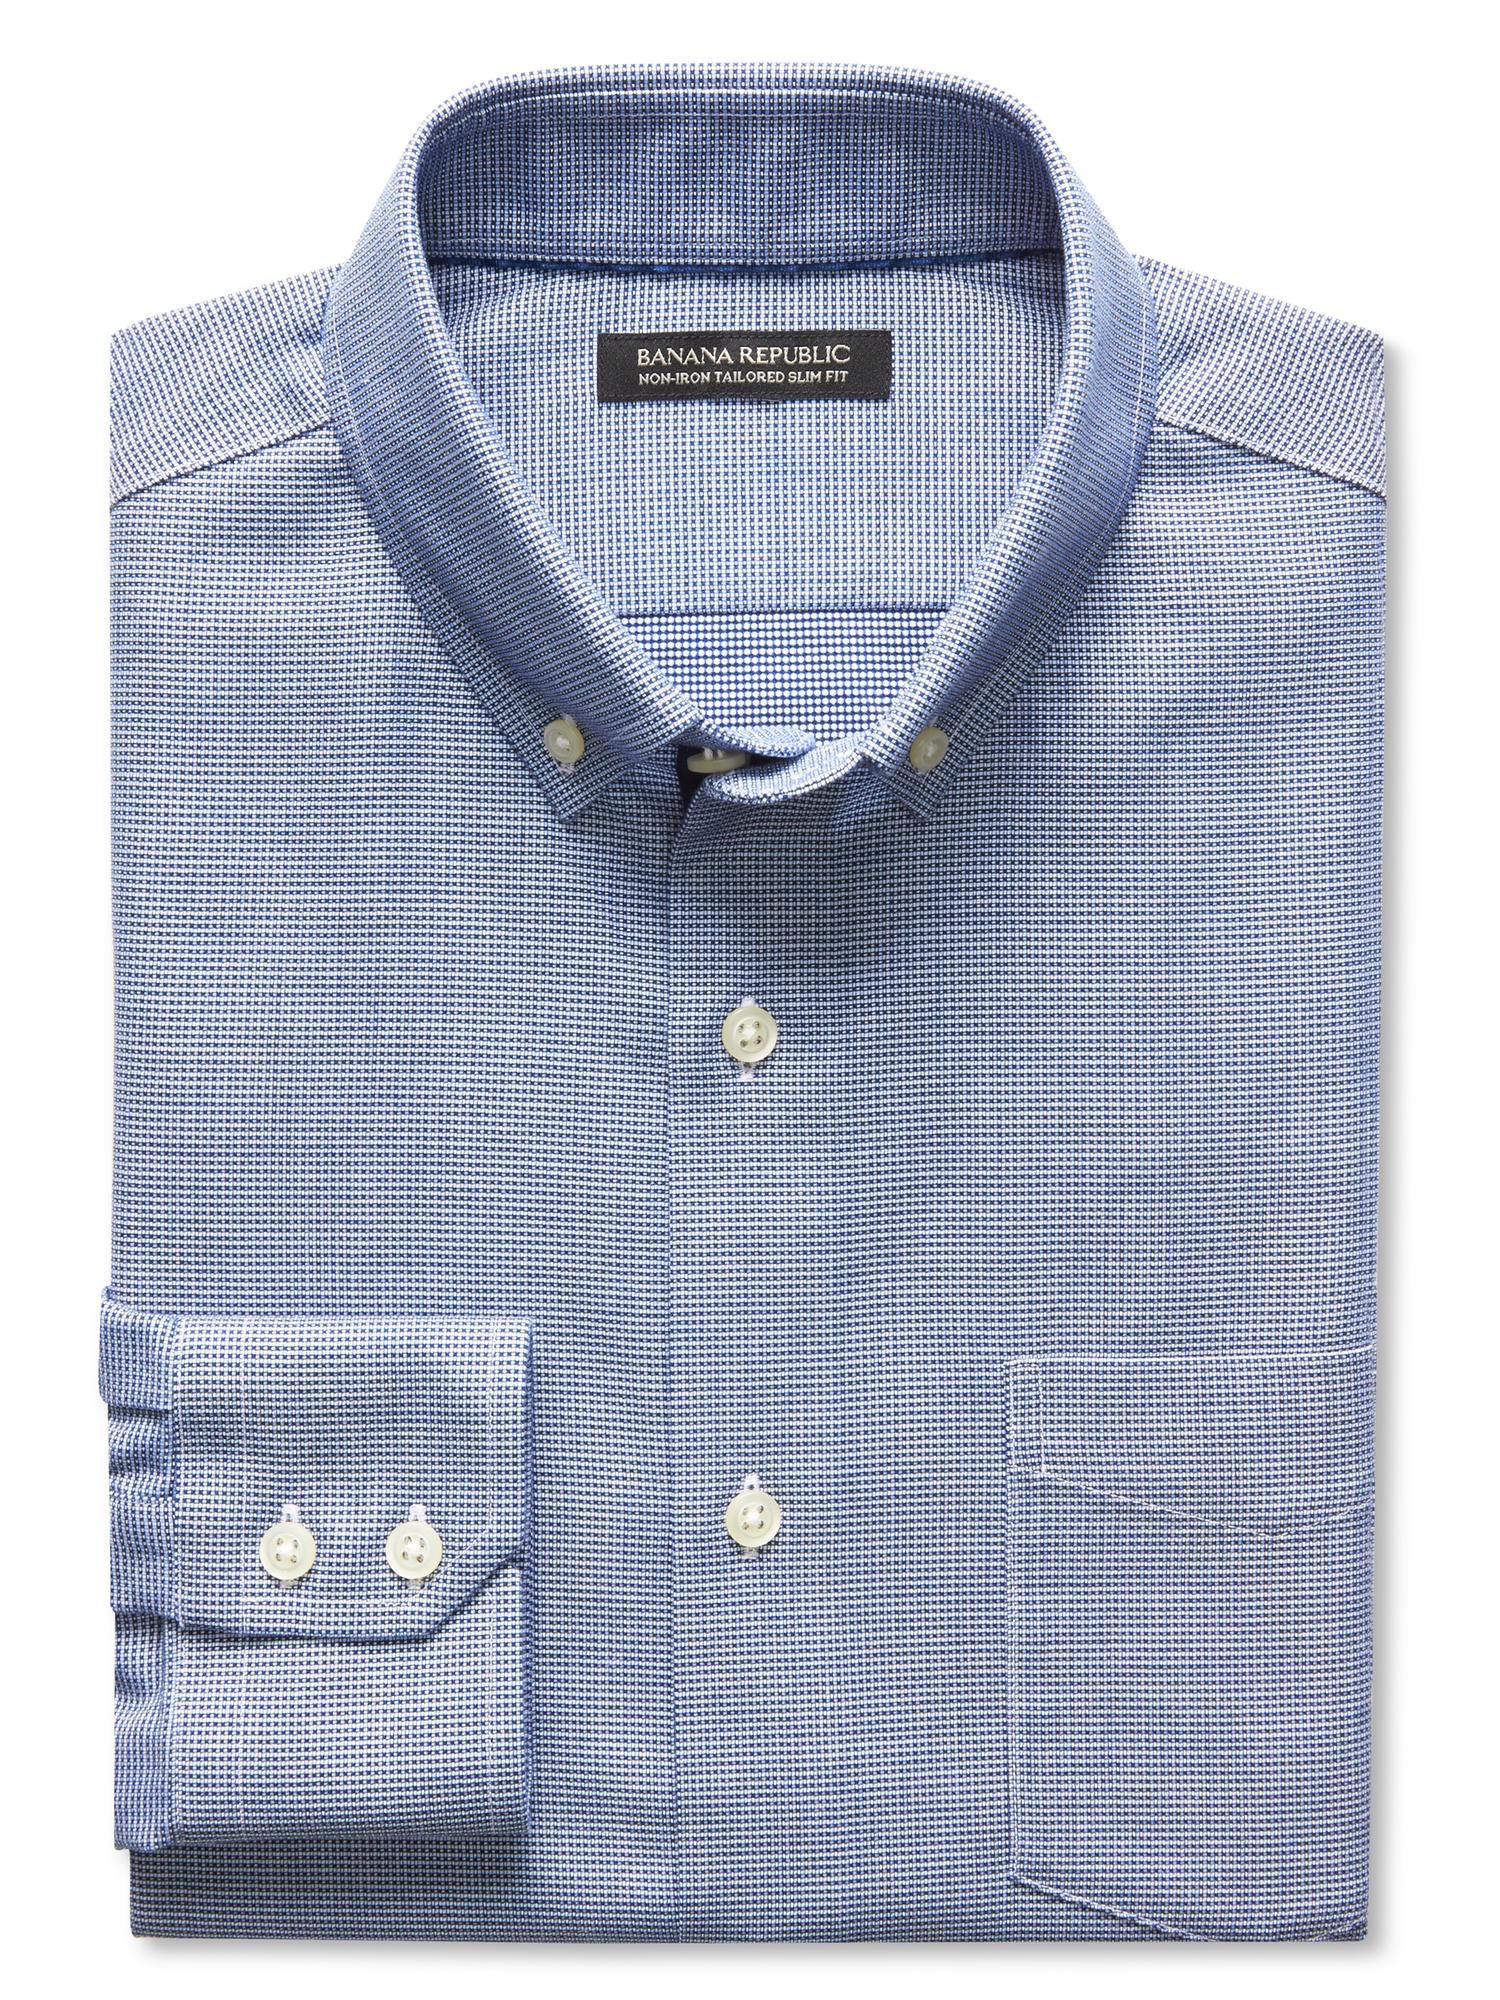 Tailored Slim-Fit Non-Iron Textured Shirt